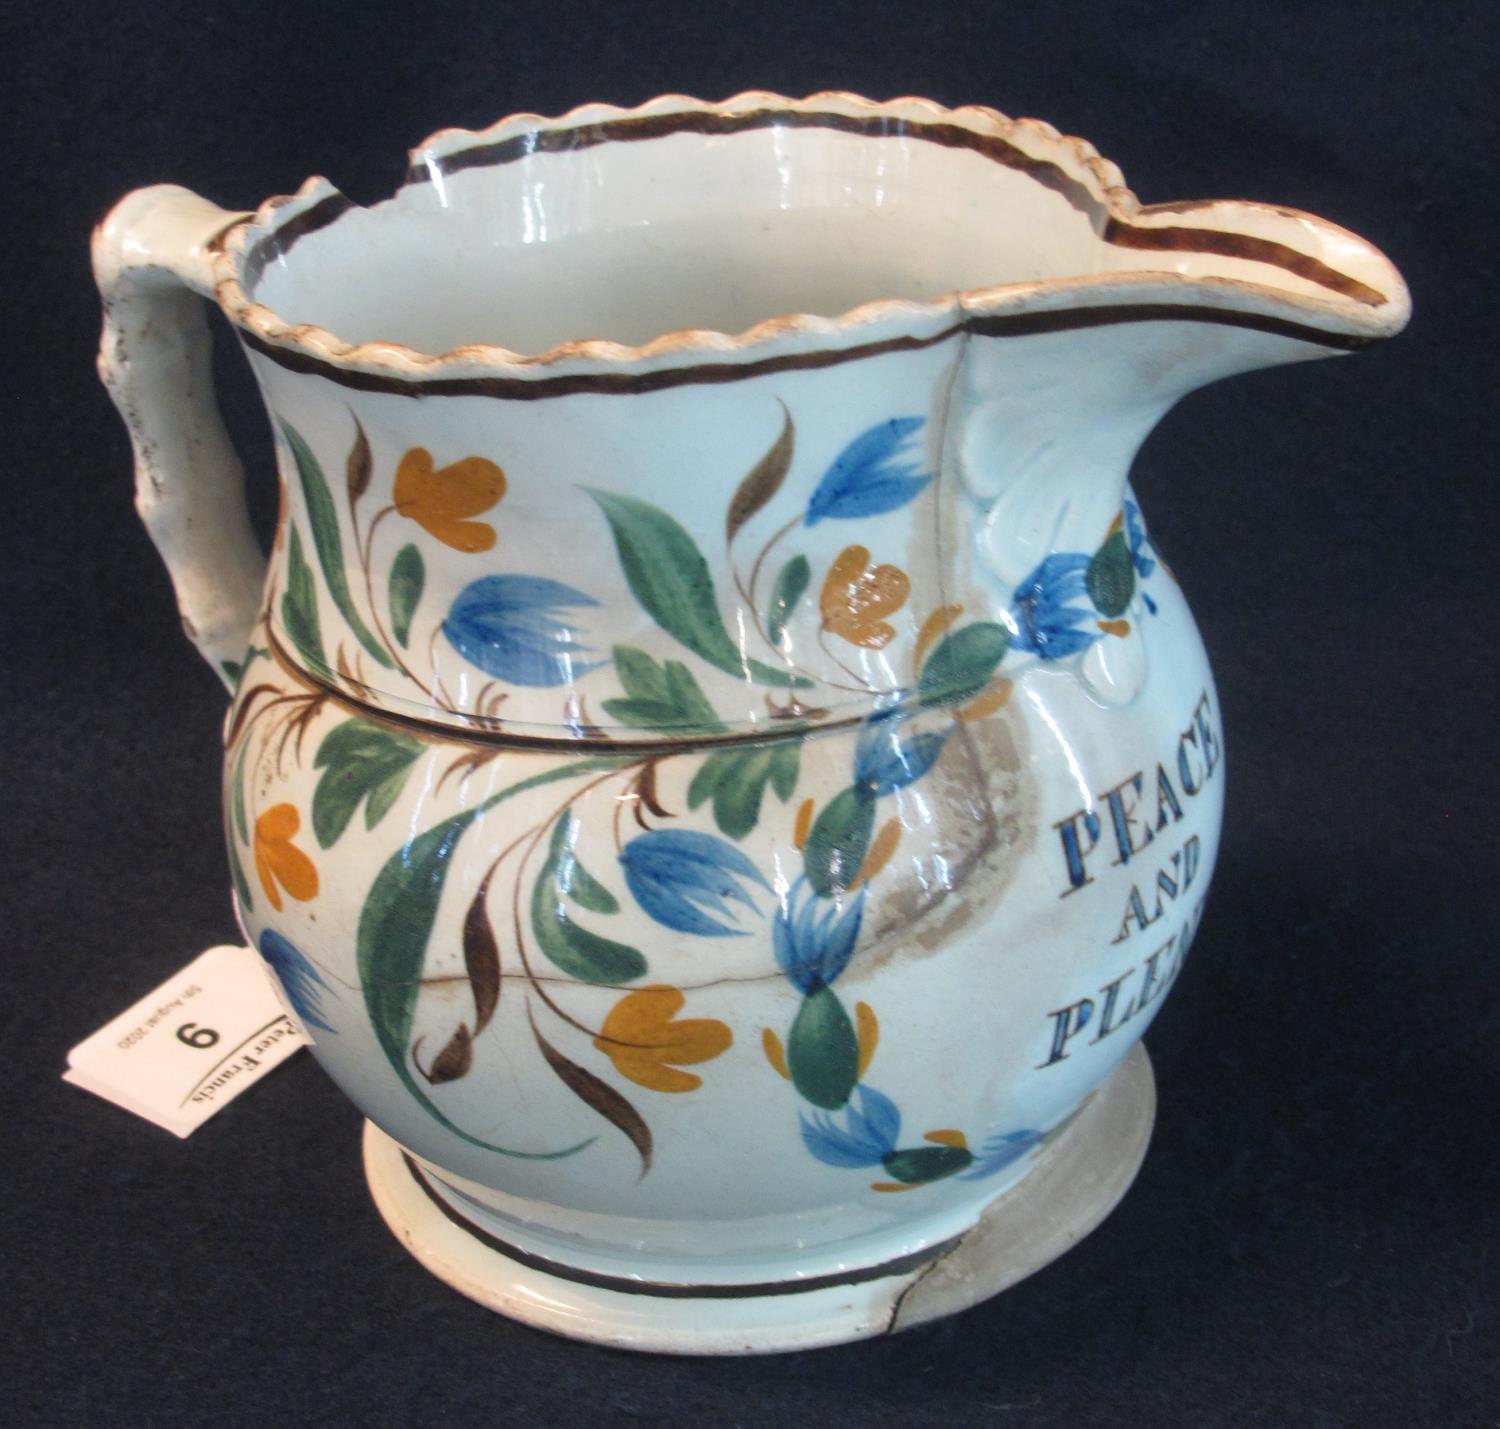 Late 18th/early 19th Century pearlware jug of baluster form, 'Peace and Plenty' with hand painted